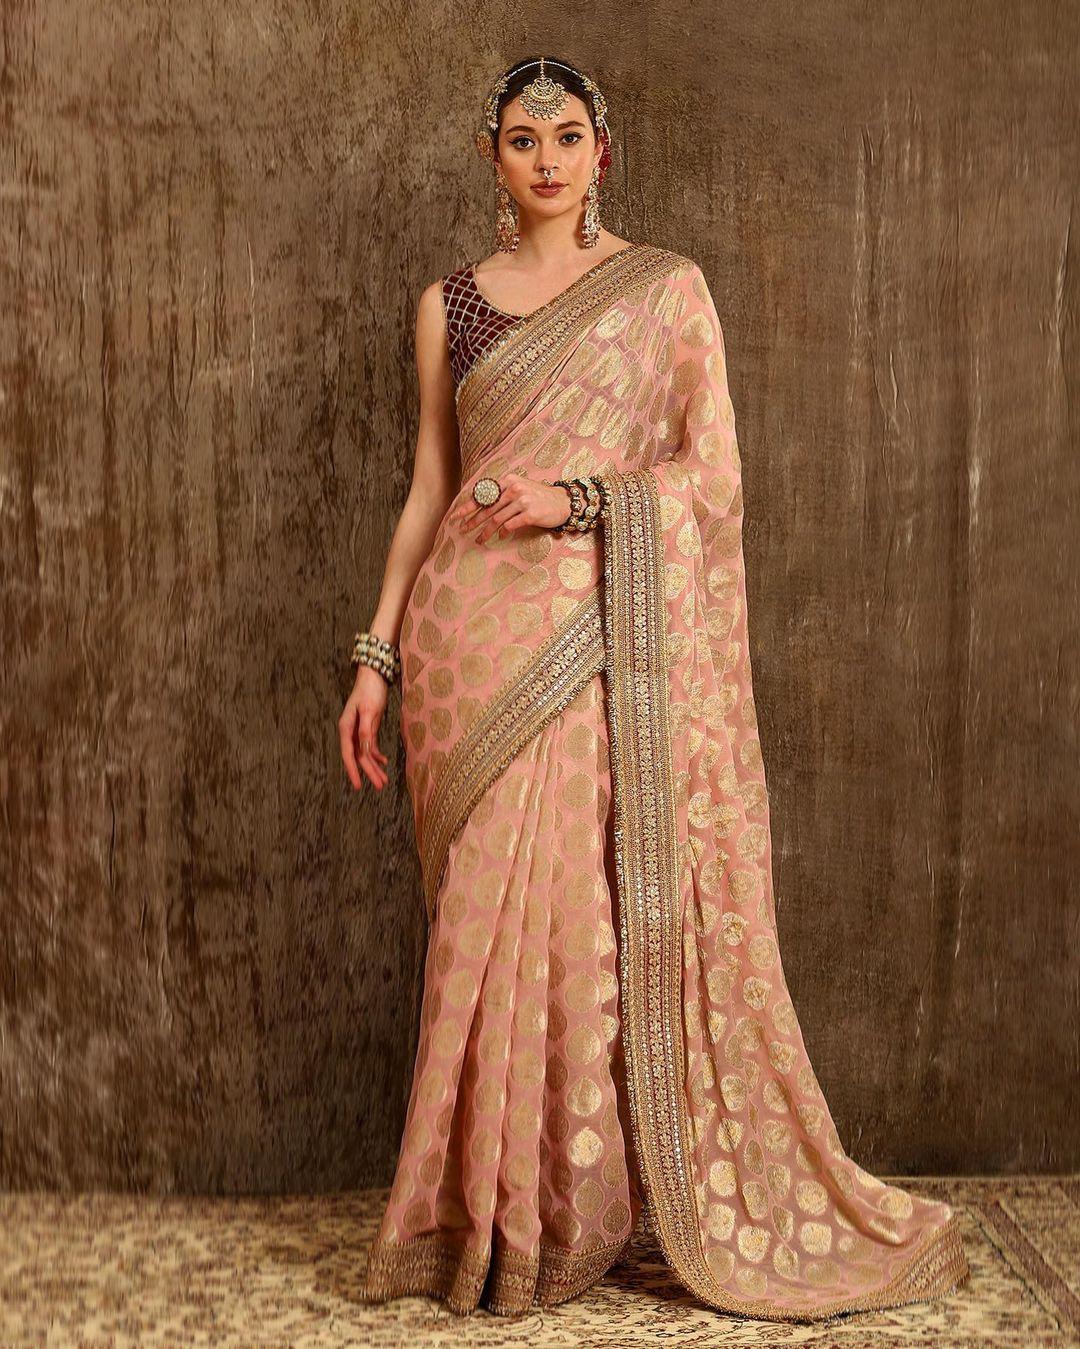 Engagement Pink Satin Crepe Pre-Stitched Saree | Ready To Wear Blouse